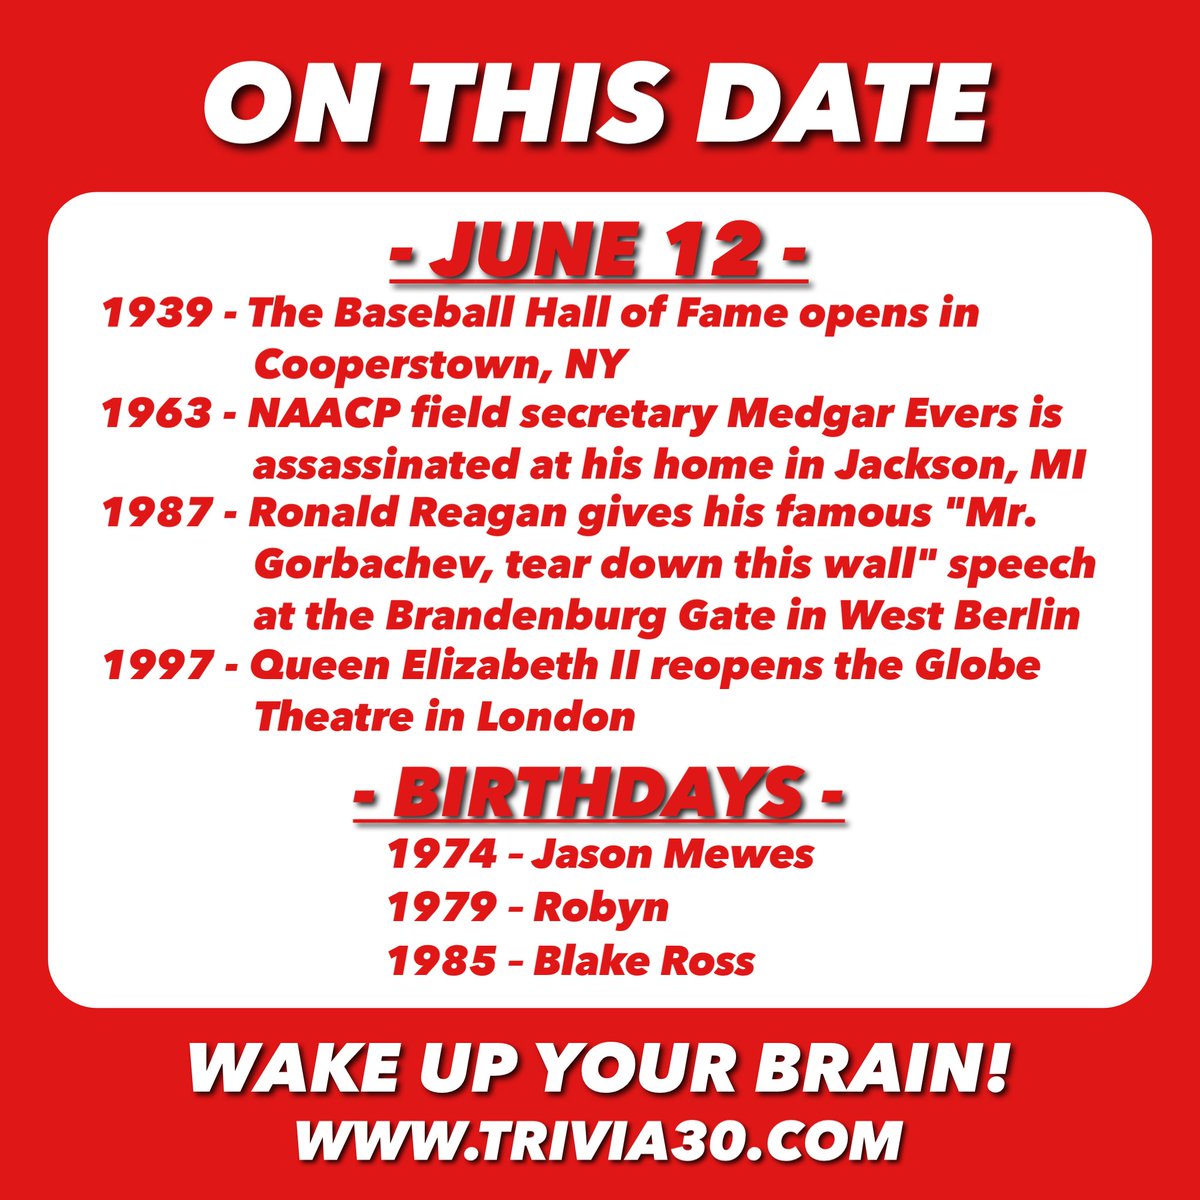 Your 6/12 OTD trivia. Join us tonight for BINGO at Dick's Wings Mayport or TRIVIA at The Brew Shed, and have a great day! #TRIVIA30 #WakeUpYourBrain #BaseballHallOfFame #Cooperstown #NAACP #MedgarEvers #RonaldReagan #BerlinWall #QEII #London #JasonMewes #Robyn #BlakeRoss #firefox